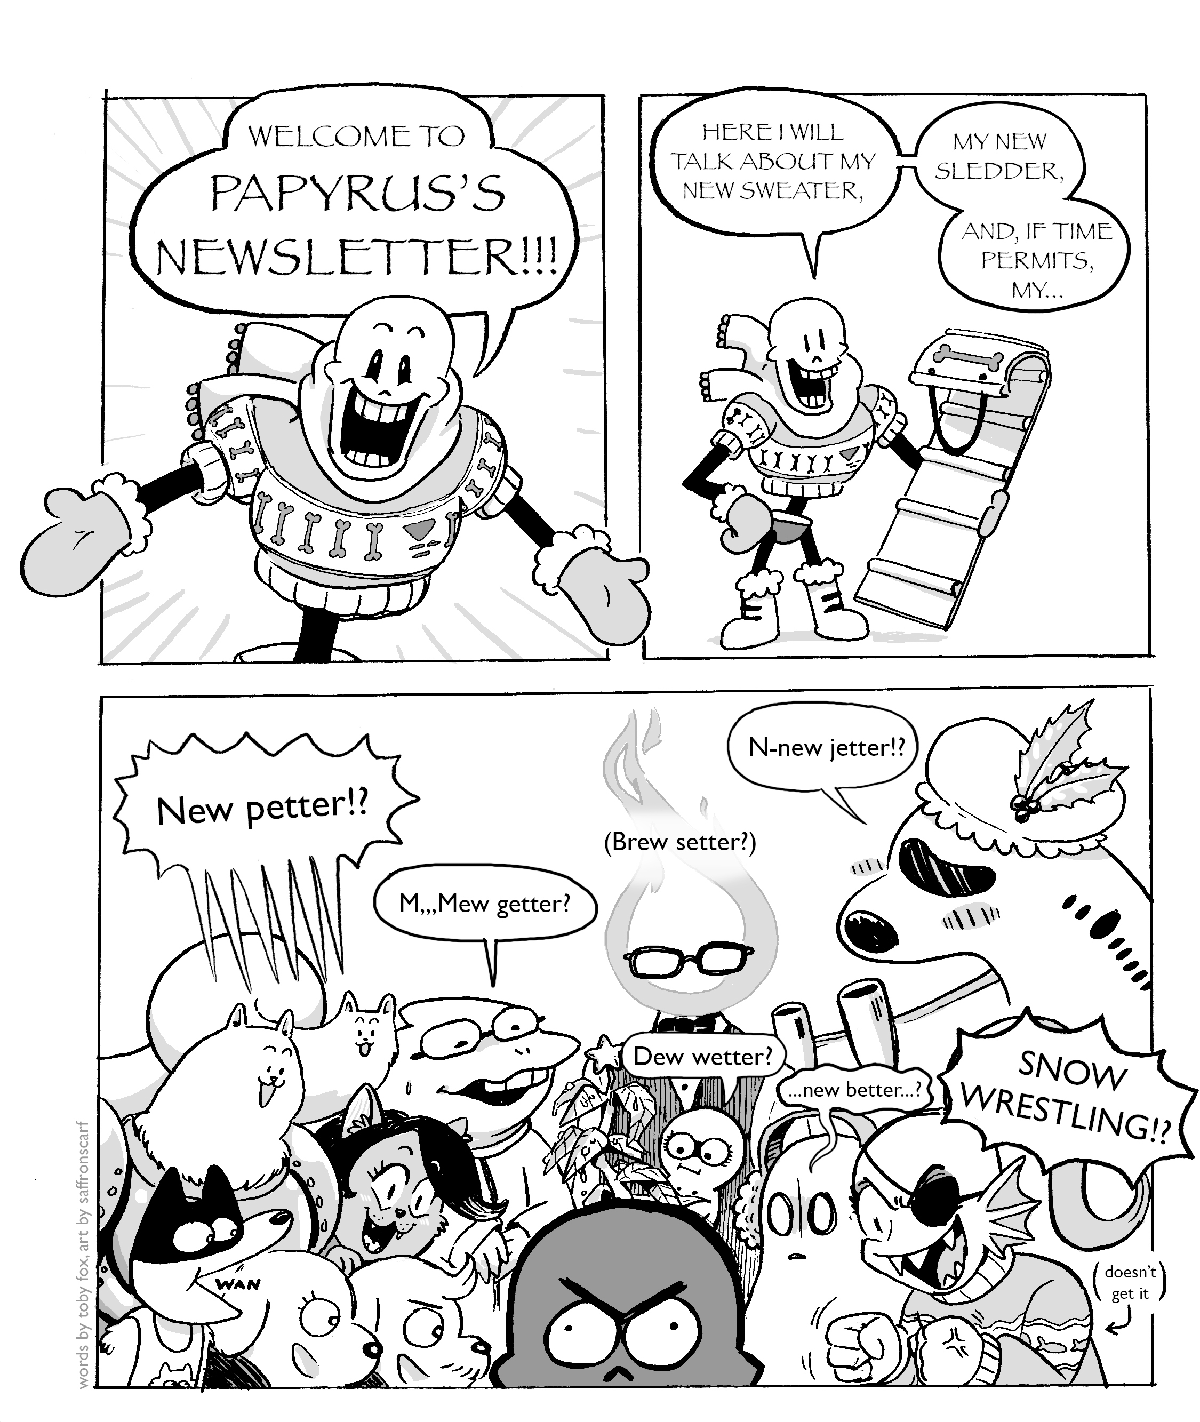 Page one of two. Three panels. First panel shows Papyrus in a holiday sweater, exclaiming 'WELCOME TO PAPYRUS'S NEWSLETTER!'. Second panel shows Papyrus holding a scarf, saying 'HERE I WILL TALK ABOUT MY NEW SWEATER, MY NEW SLEDDER, AND IF TIME PERMITS, MY...'. Third panel shows Papyrus upset, as many characters from Snowdin appear. Snow dogs ask 'New petter!?', Alphys asks 'M...Mew getter?', Grillby asks 'Brew setter?', Tsunderplane asks 'N-new jetter!?', Napstablook asks '...new better...?', Undyne doesn't get it and asks 'SNOW WRESTLING!?'